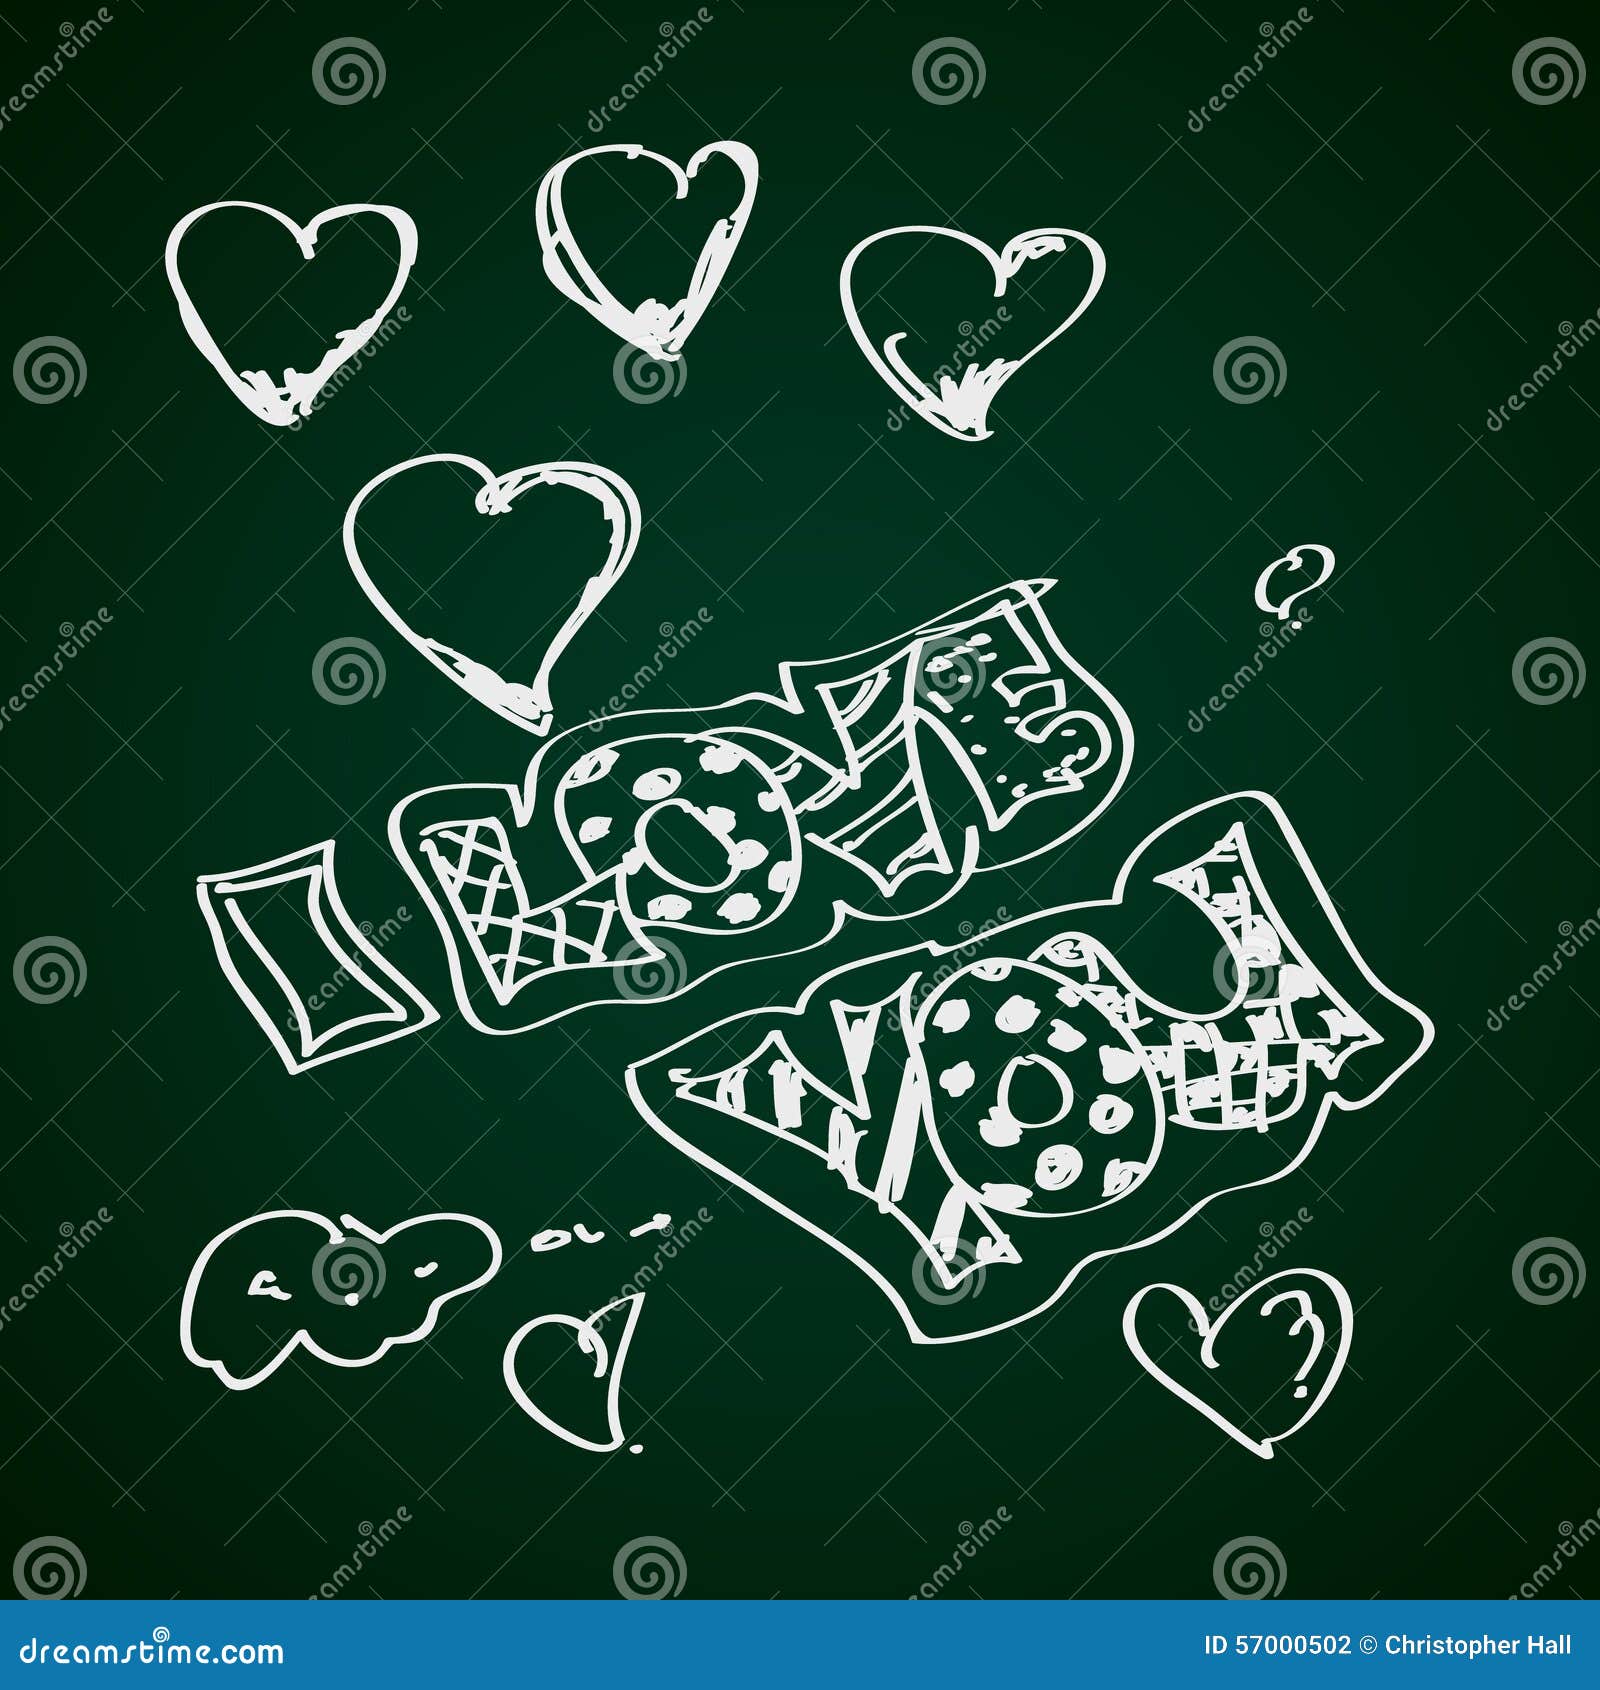 Simple Doodle Love Stock Vector Image 57000502 Royalty Free Download